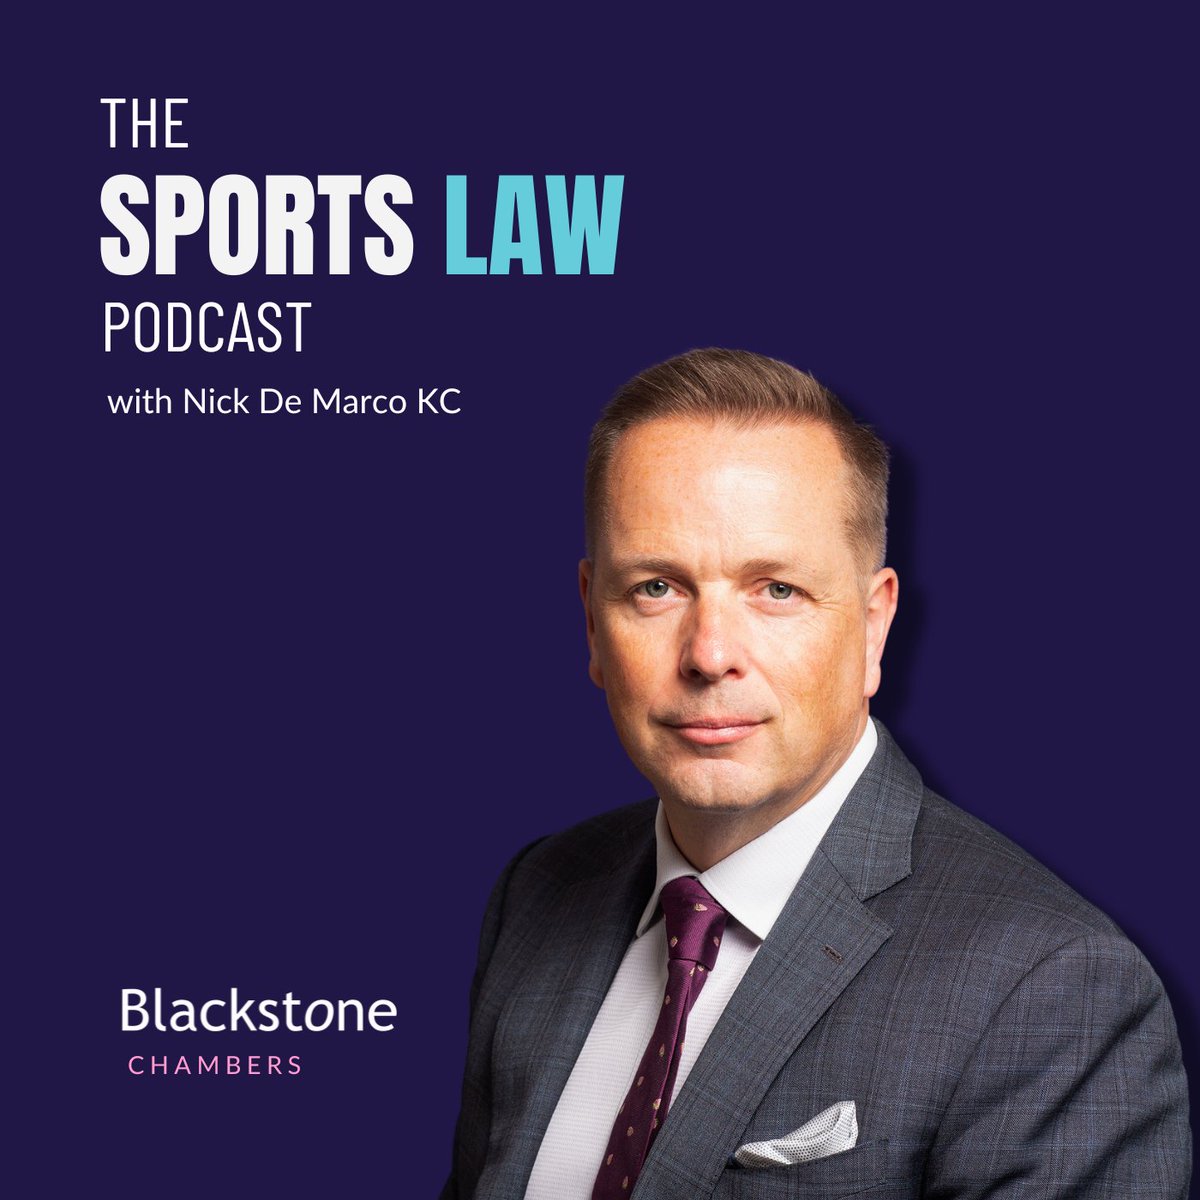 Blackstone Chambers is pleased to announce that The Sports Law Podcast, hosted by @nickdemarco_ KC, has been recognised as one of the top 25 UK sports podcasts by @_feedspot. Listen on: blackstonechambers.com/podcasts/ podcasts.feedspot.com/uk_sports_podc…